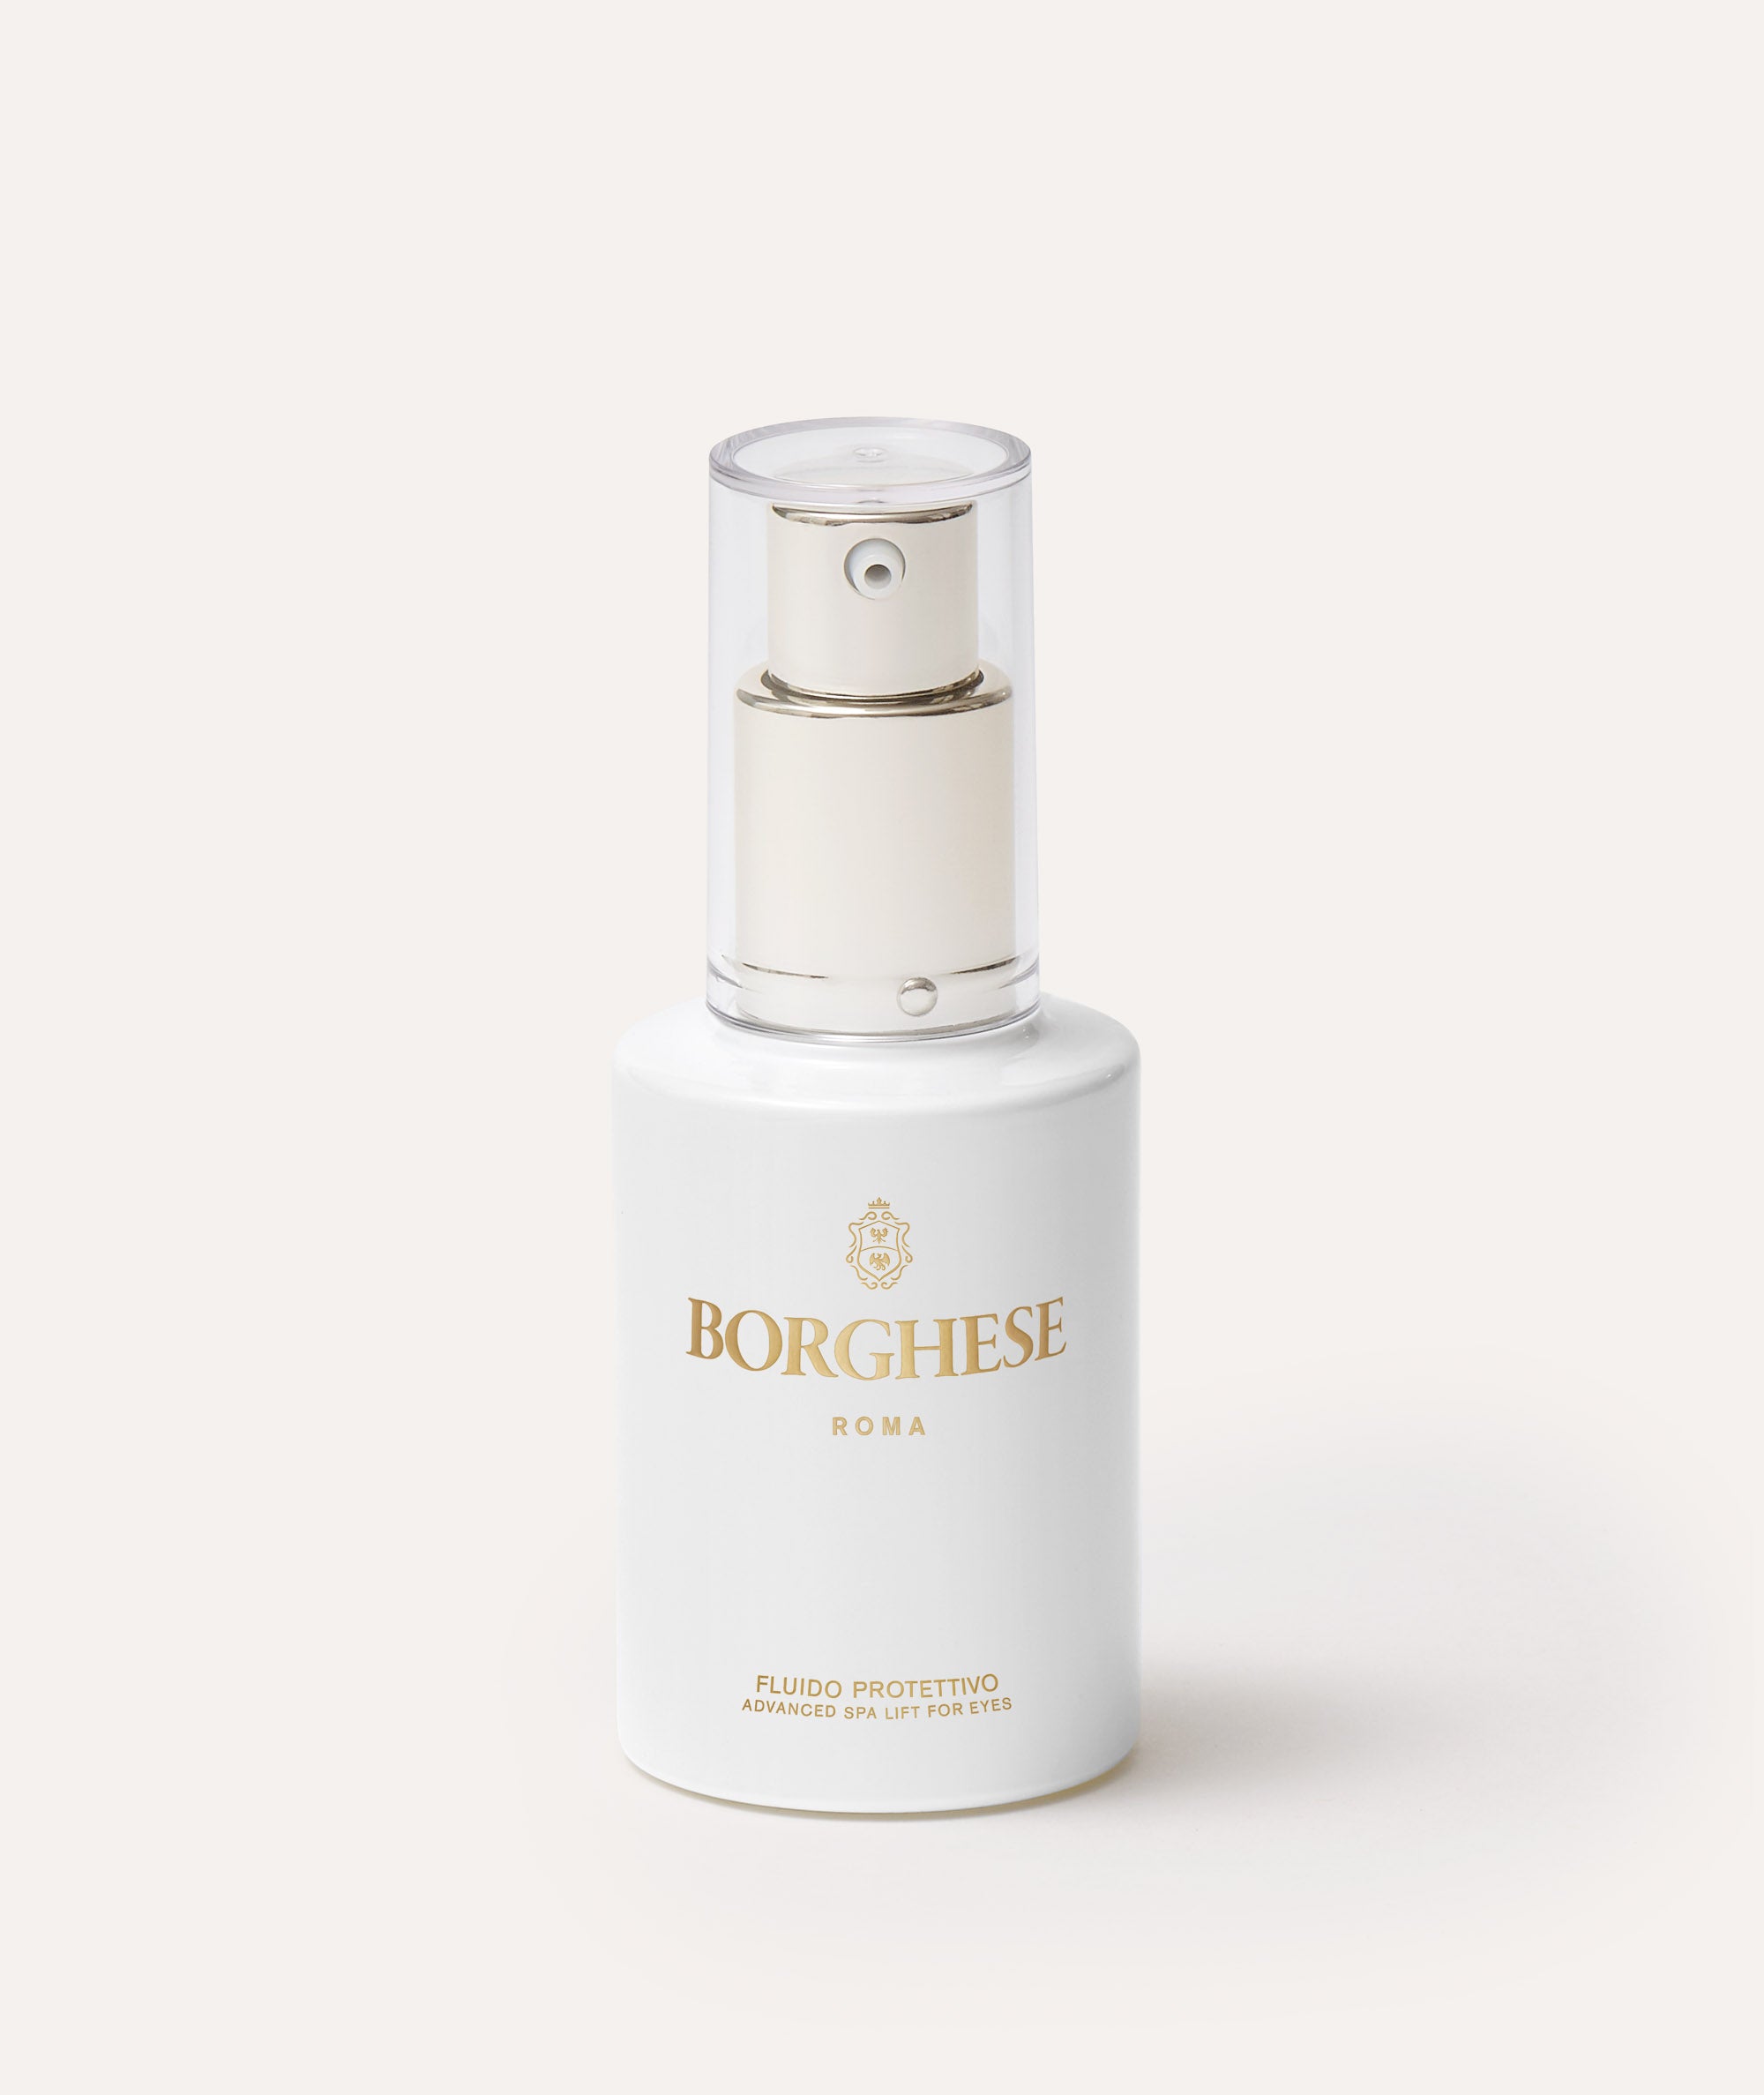 This is a picture of the Borghese Fluido Protettivo Advanced Eye Lift bottle